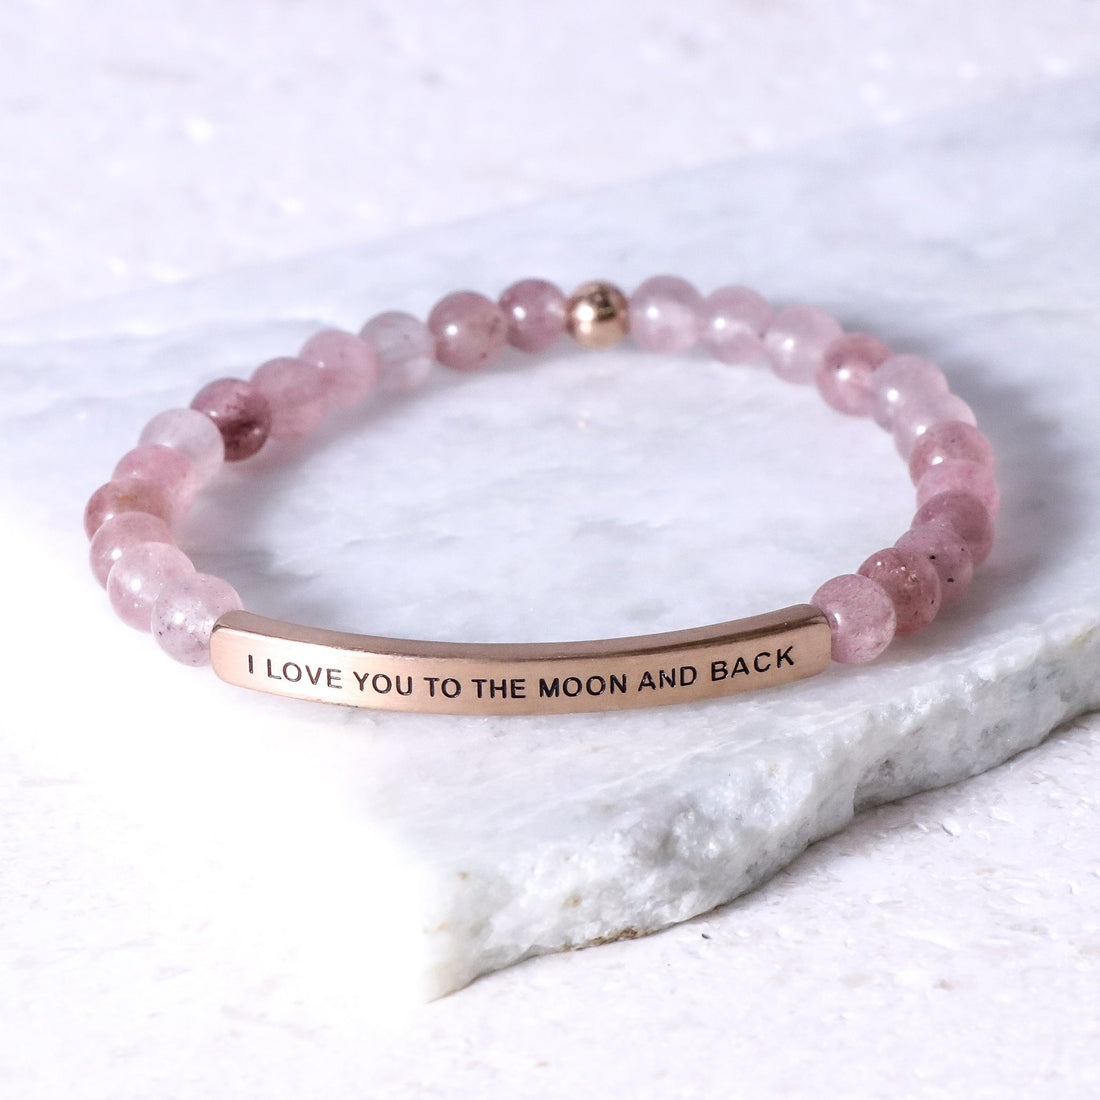 I LOVE YOU TO THE MOON AND BACK - Kids Collection - Inspiration Co.